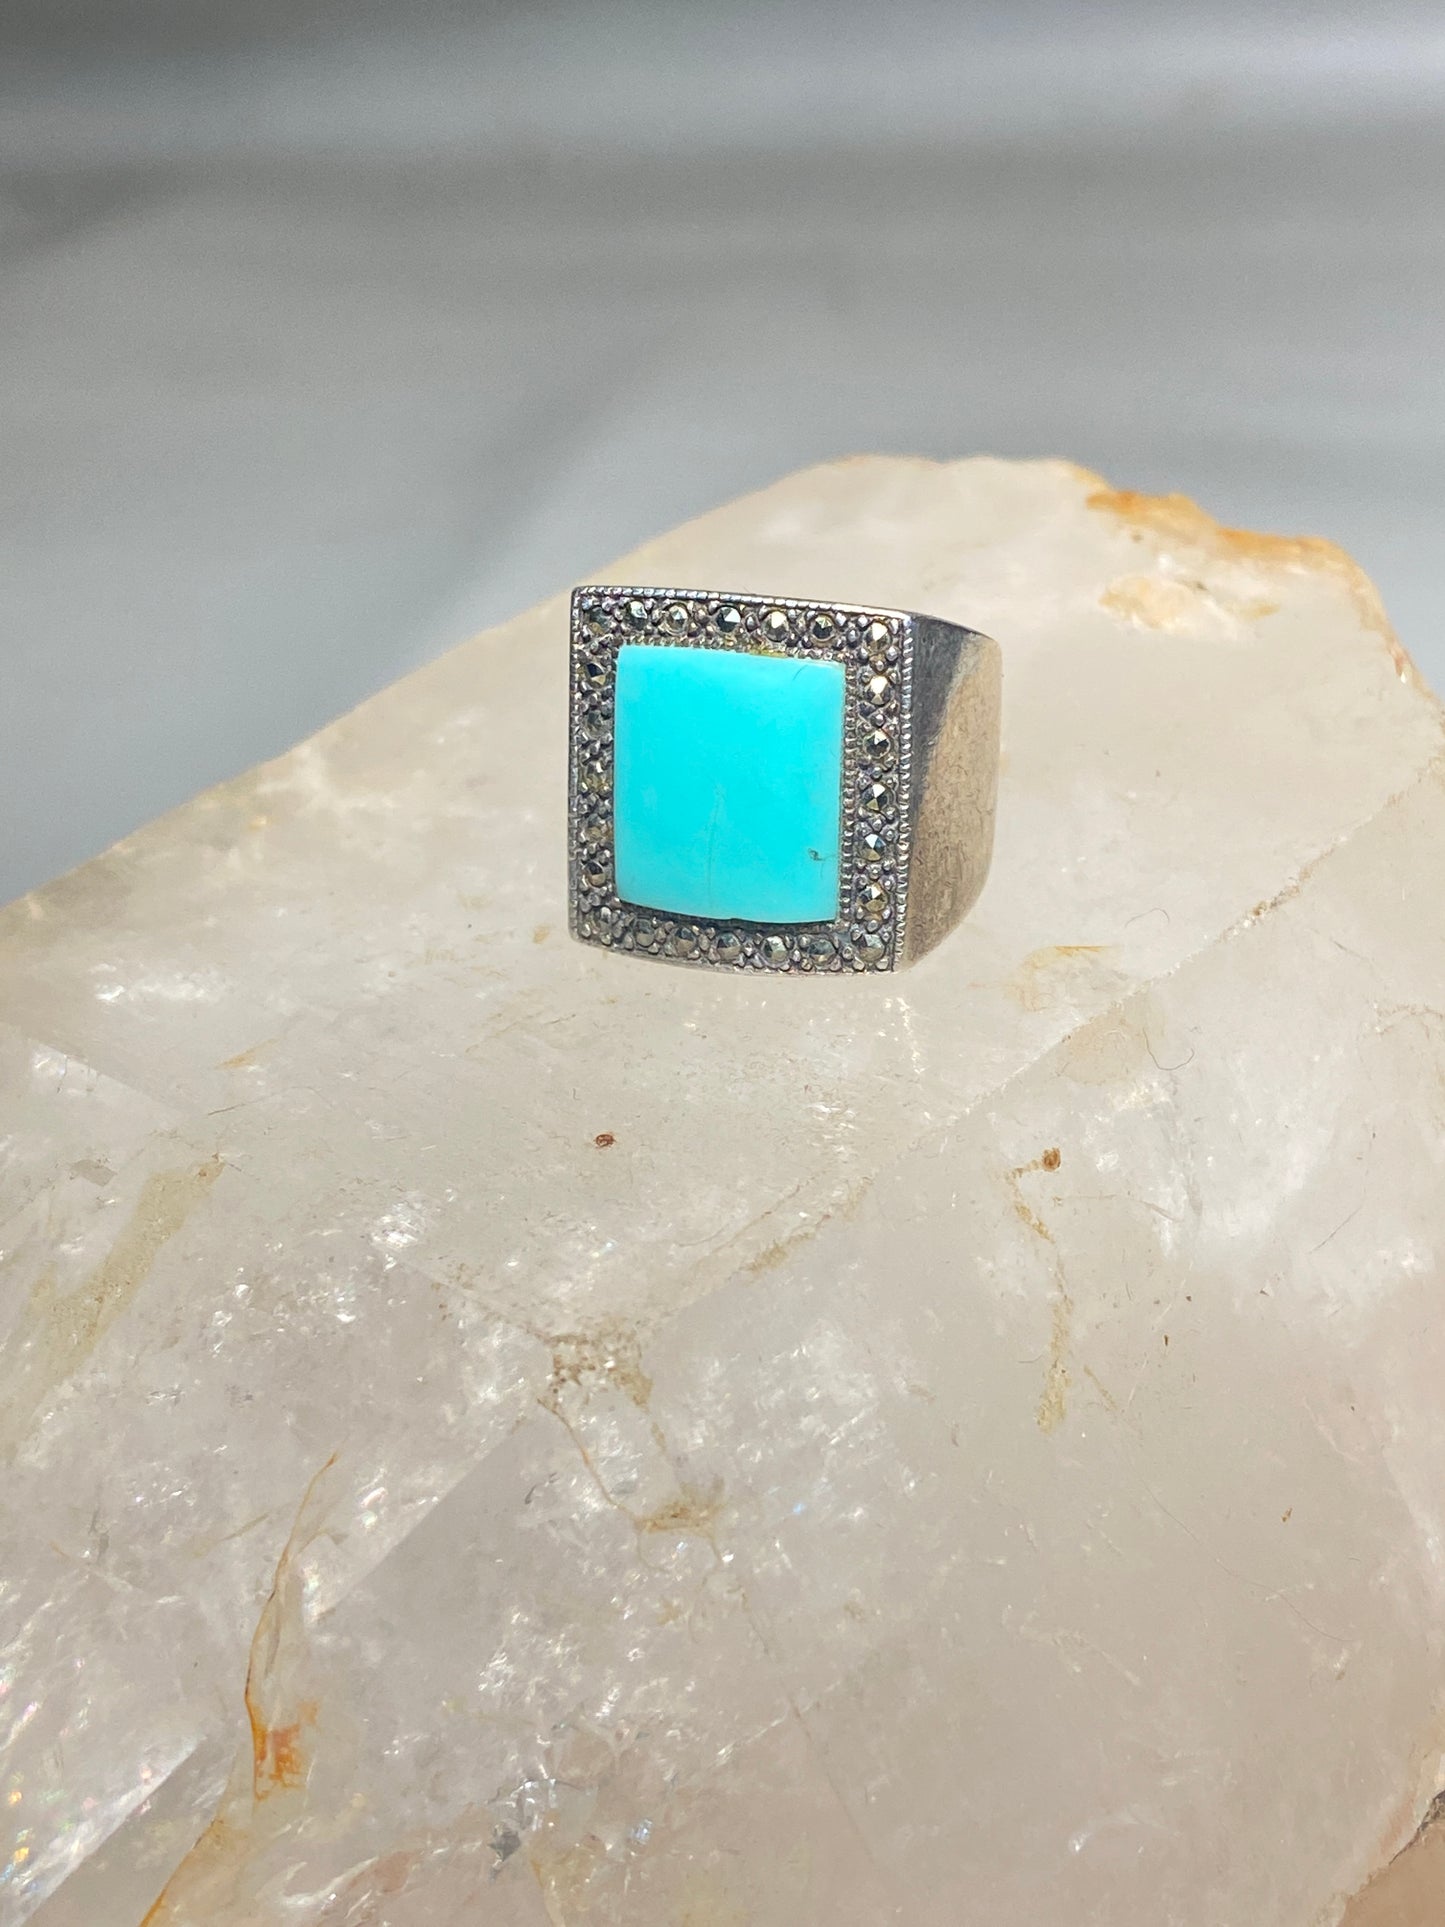 Turquoise ring size 5.75 marcasites band mid century sterling silver women